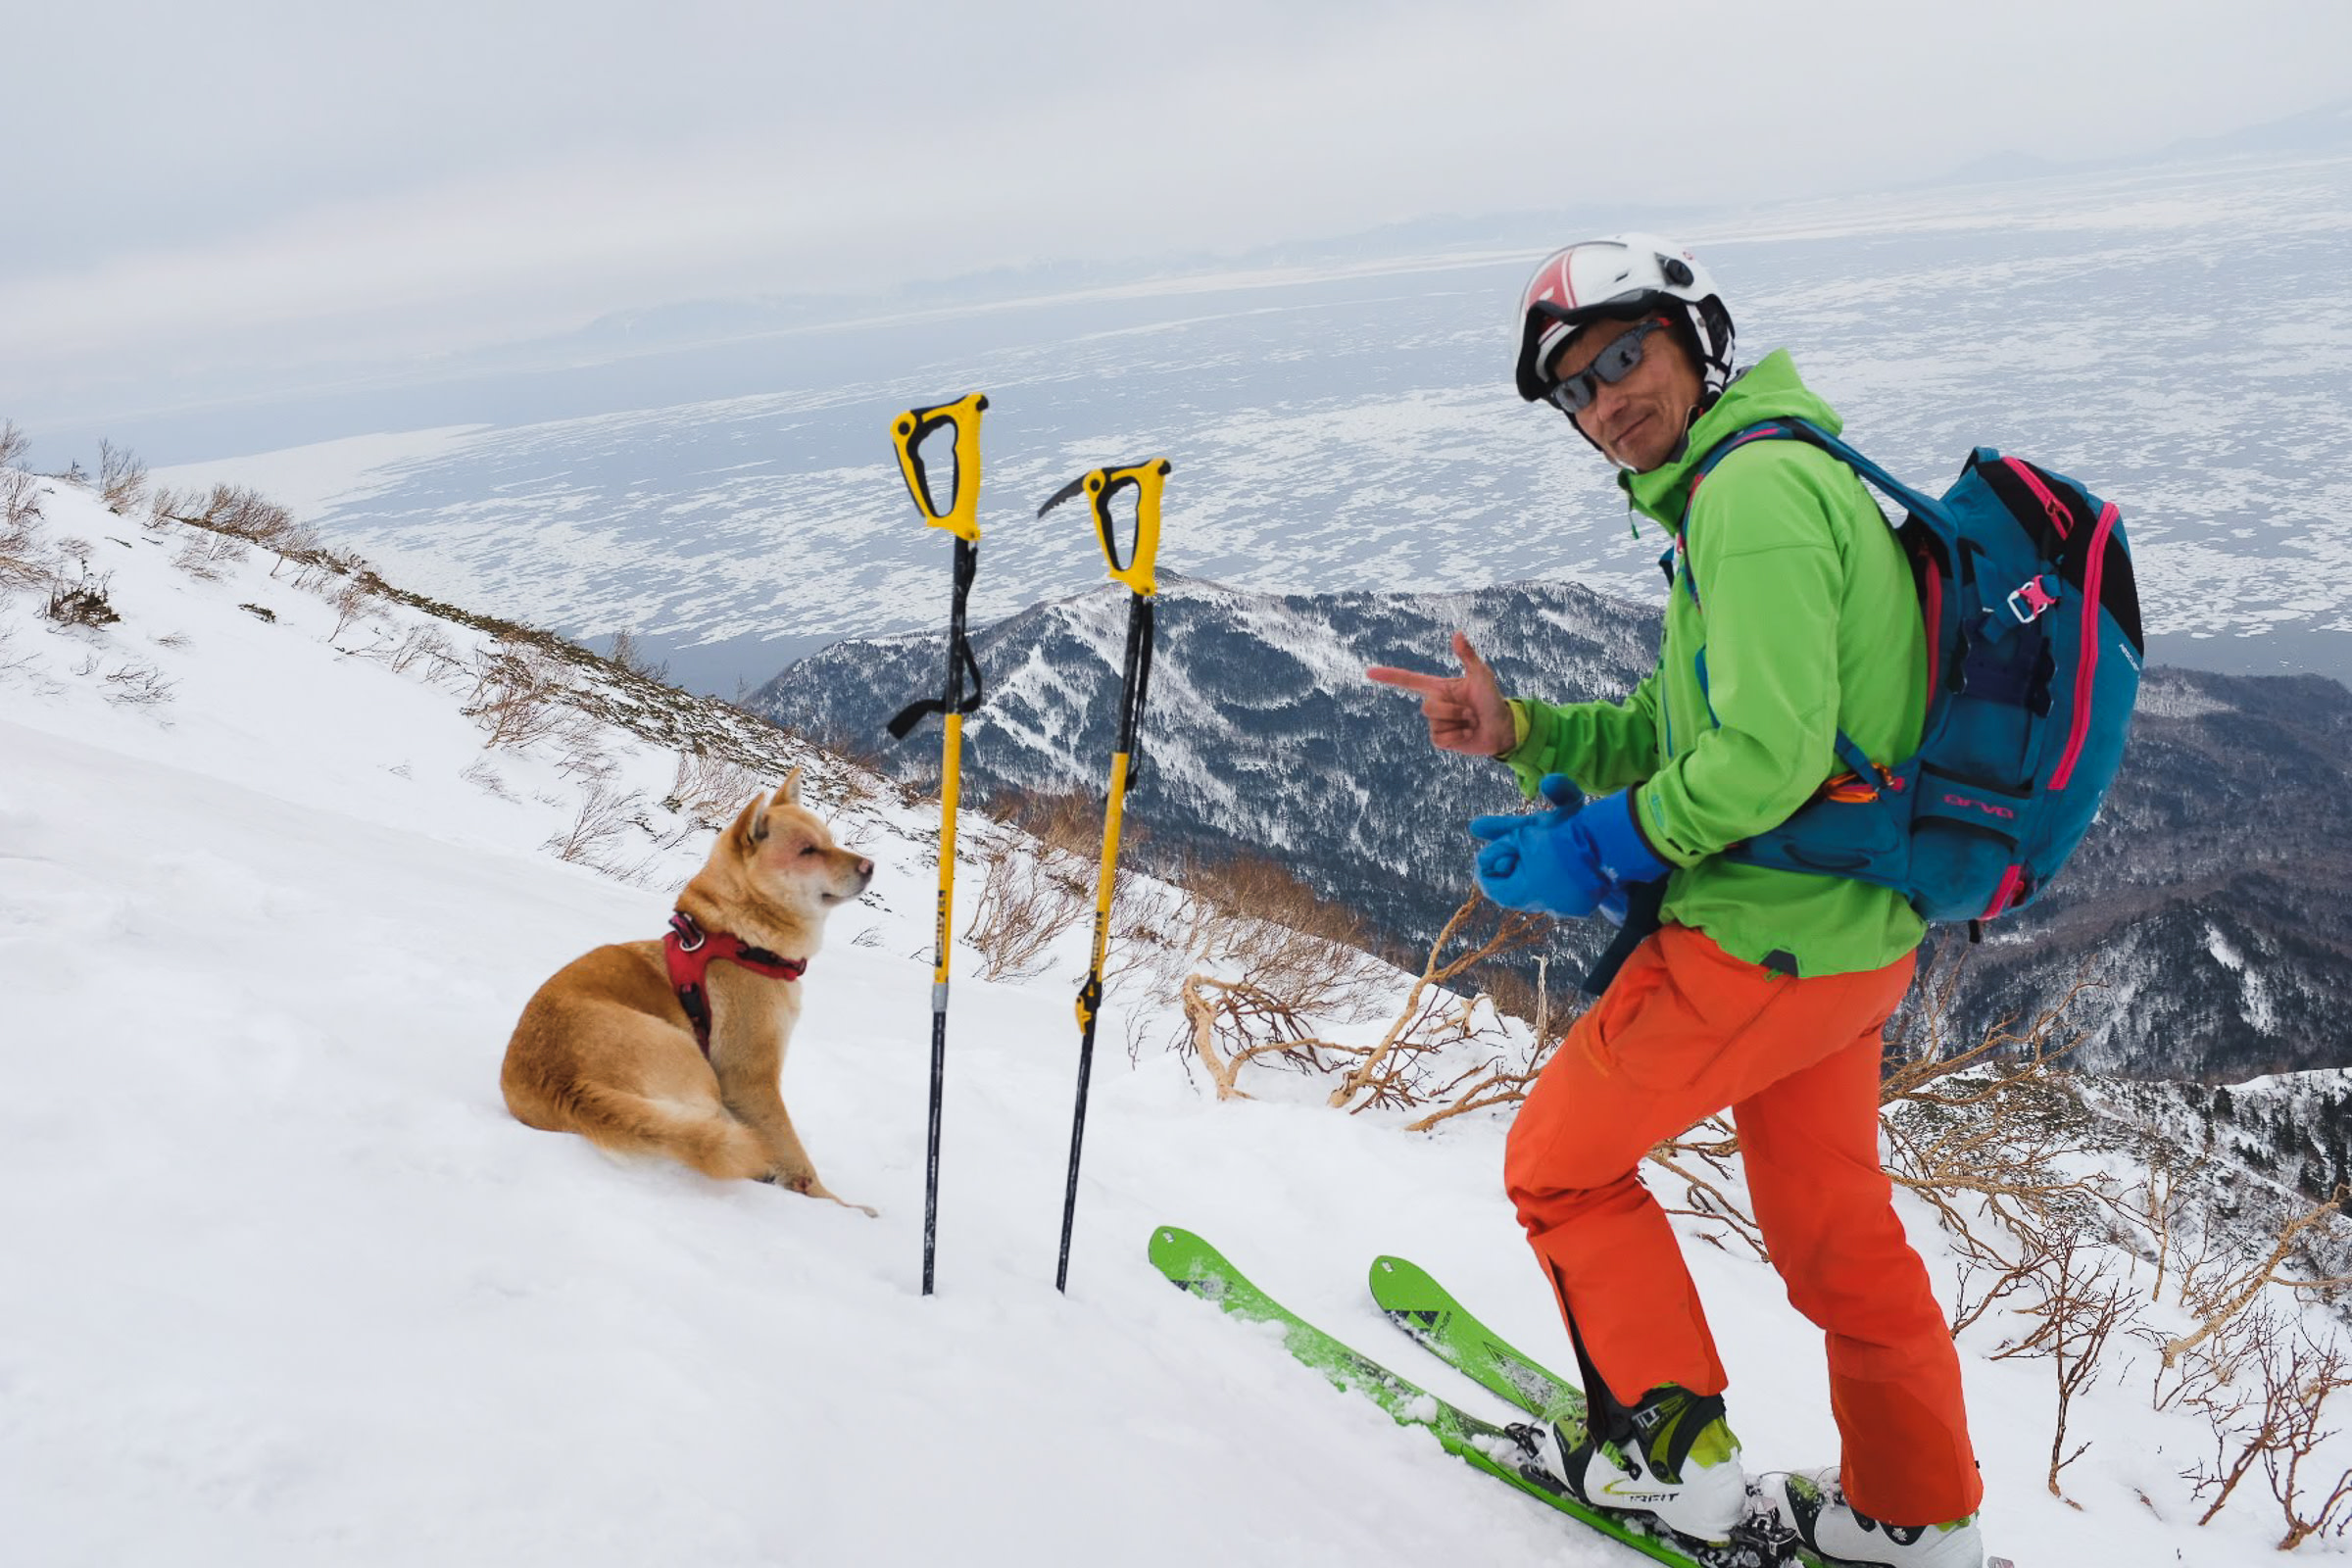 Adventure Hokkaido guide Gen poses high on a mountain while skiing in Shiretoko. He is with his dog, a tea coloured Shiba Inu. In the background, drift ice floats on the surface of the Sea of Okhotsk.